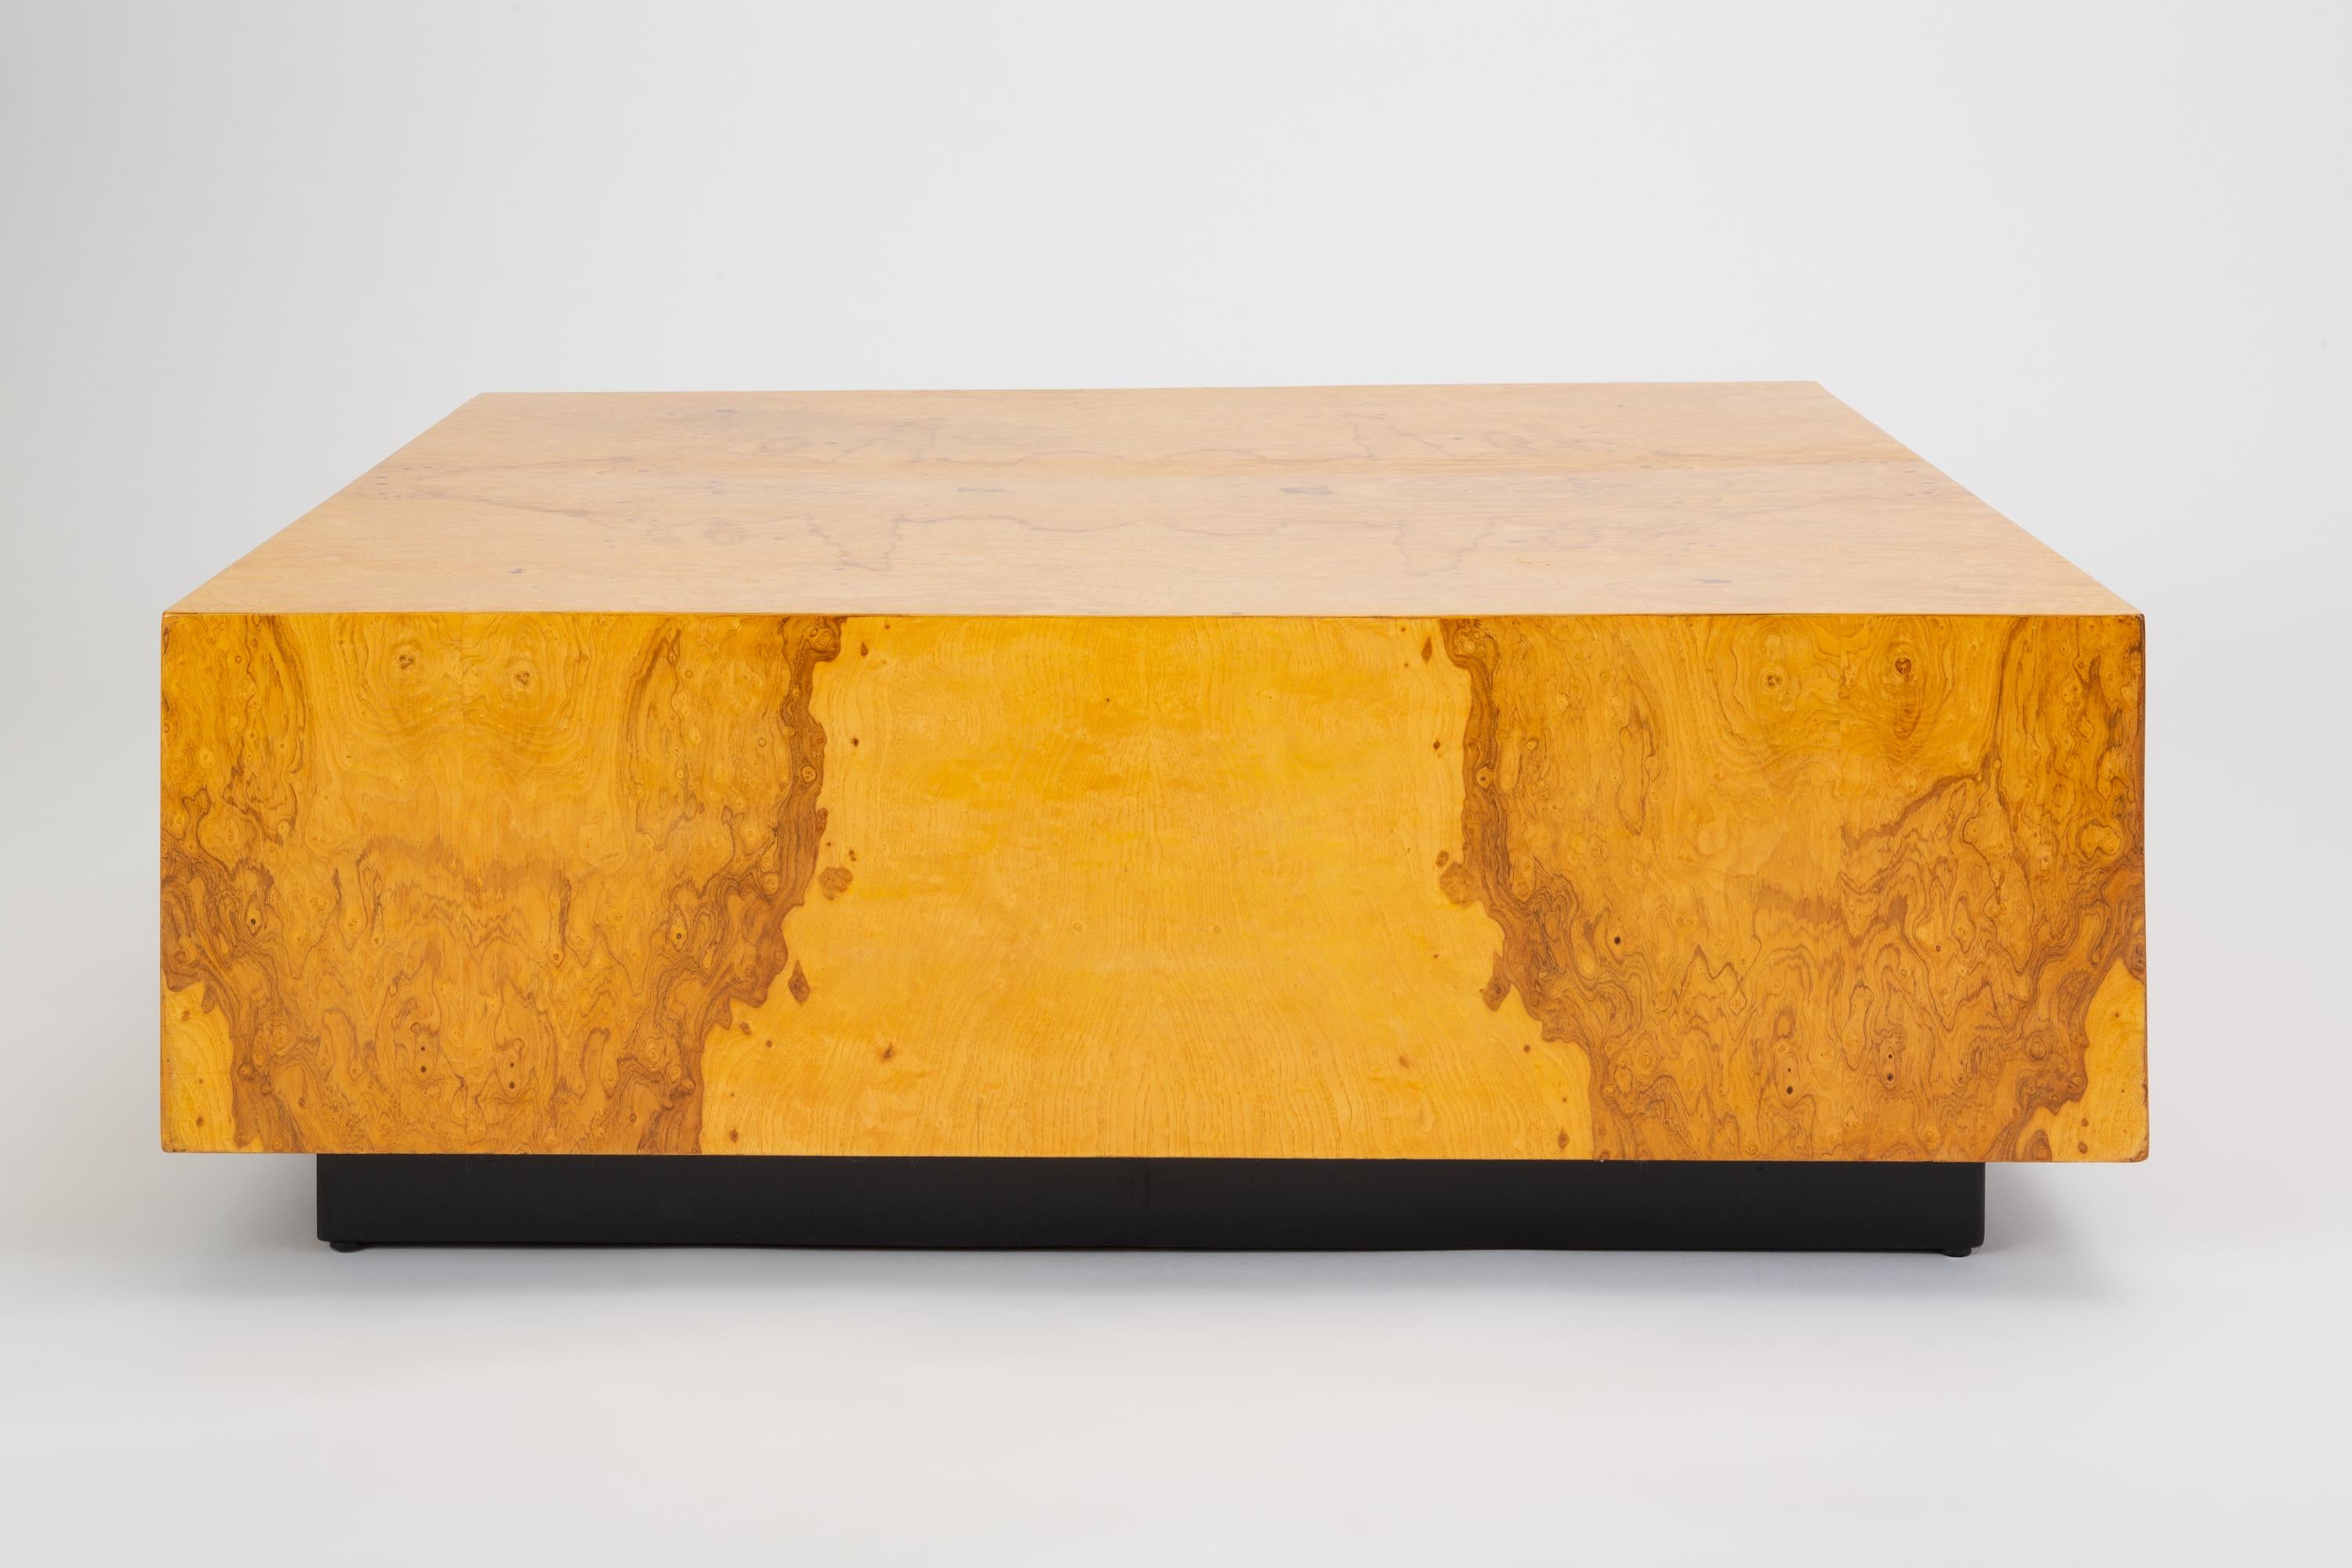 A late 1970s square coffee table on a black plinth base. The surface of the large piece is veneered in bookmatched burl wood. We have a matching pair of side tables available as well. 

Condition: Excellent vintage condition; refinished but some